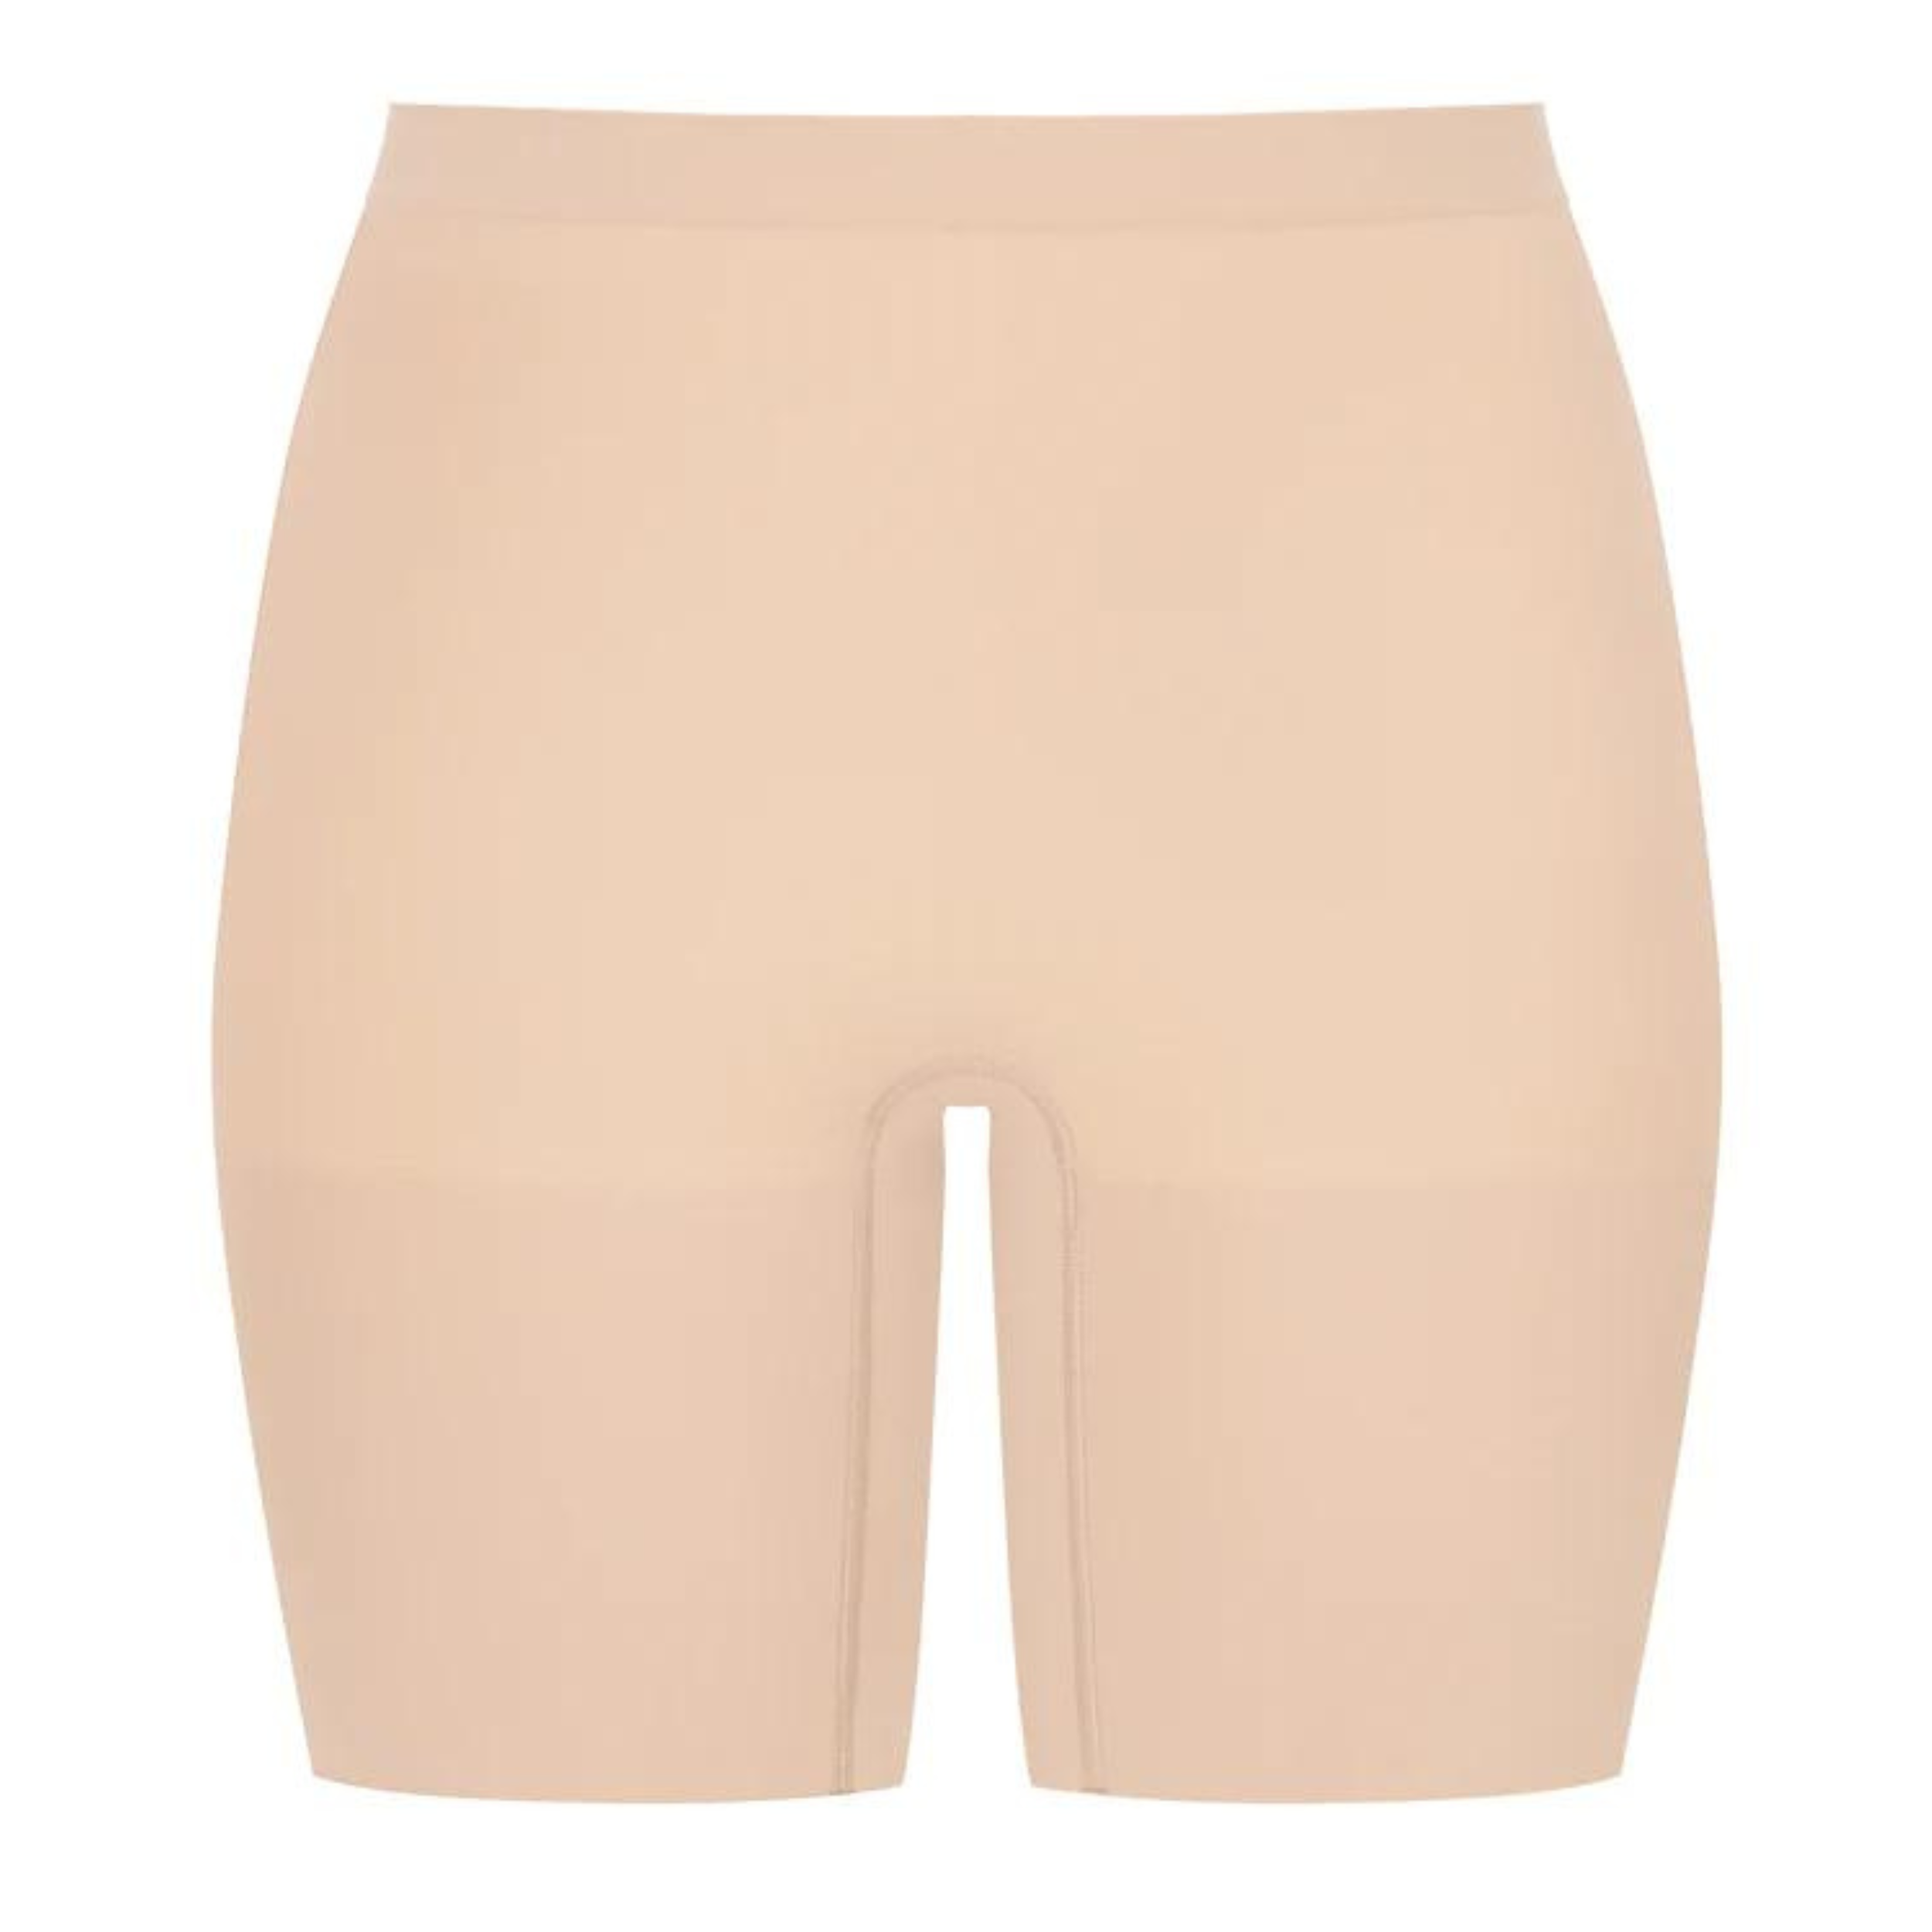 A pair of nude mid thigh  shorts with a high waist line. Pictured on a white background.